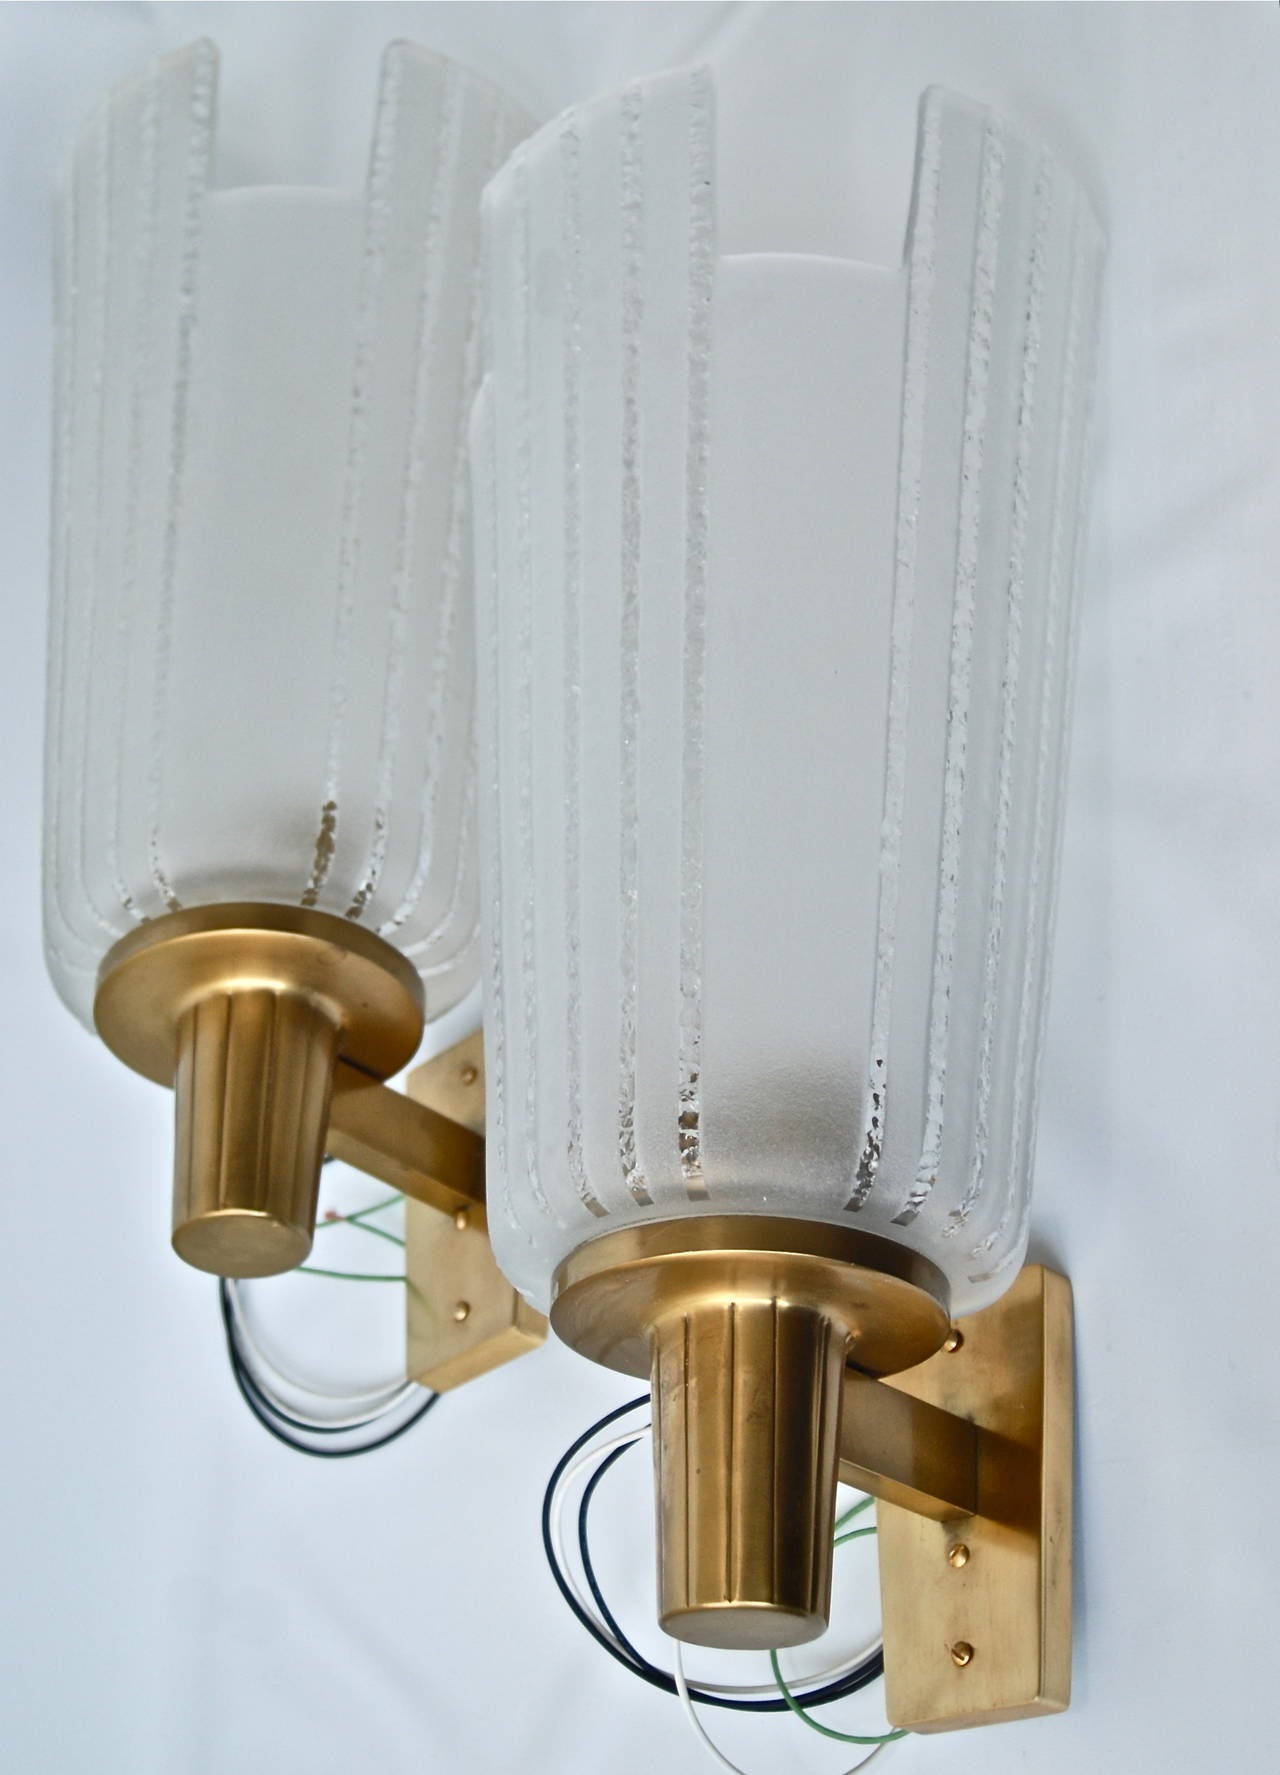 A pair of large Swedish Art Deco wall lights, circa 1940.
Attributed to Orrefors.
Brass, striped sandblasted glass shades. Height: 50 cm (20